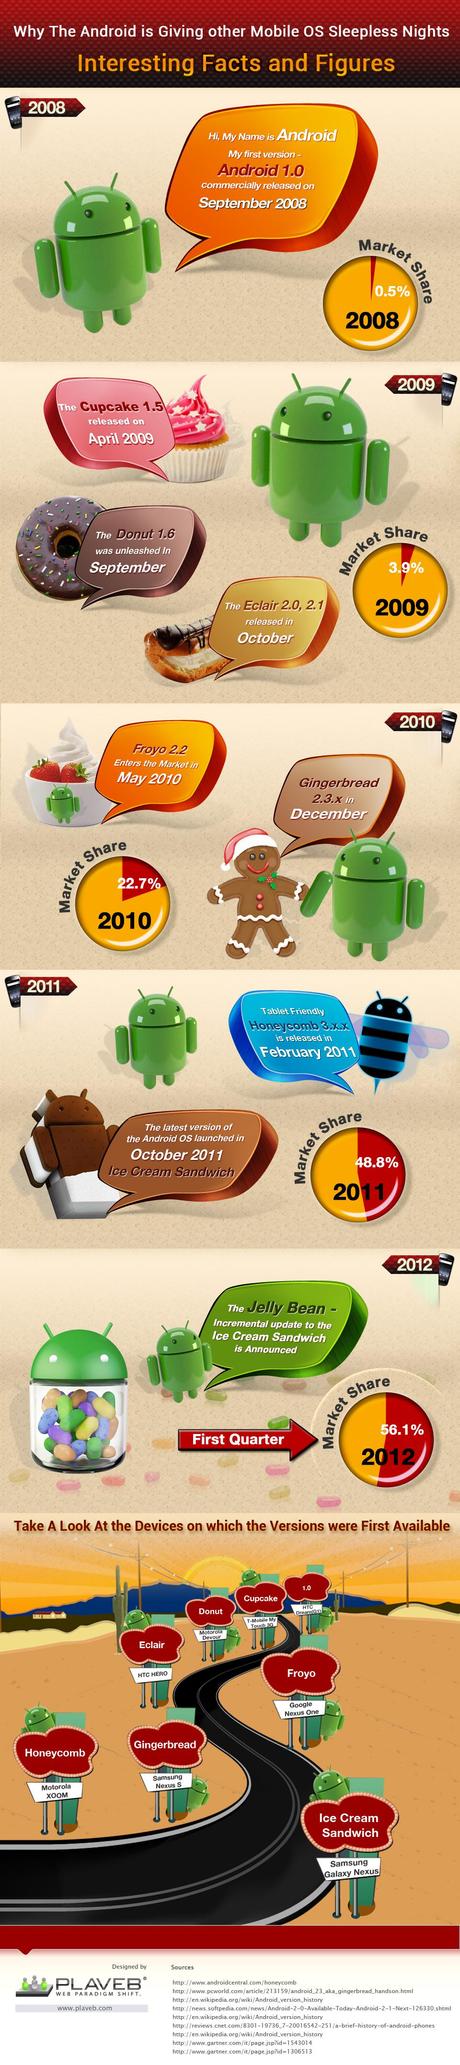 Infographic Timeline of the Android OS